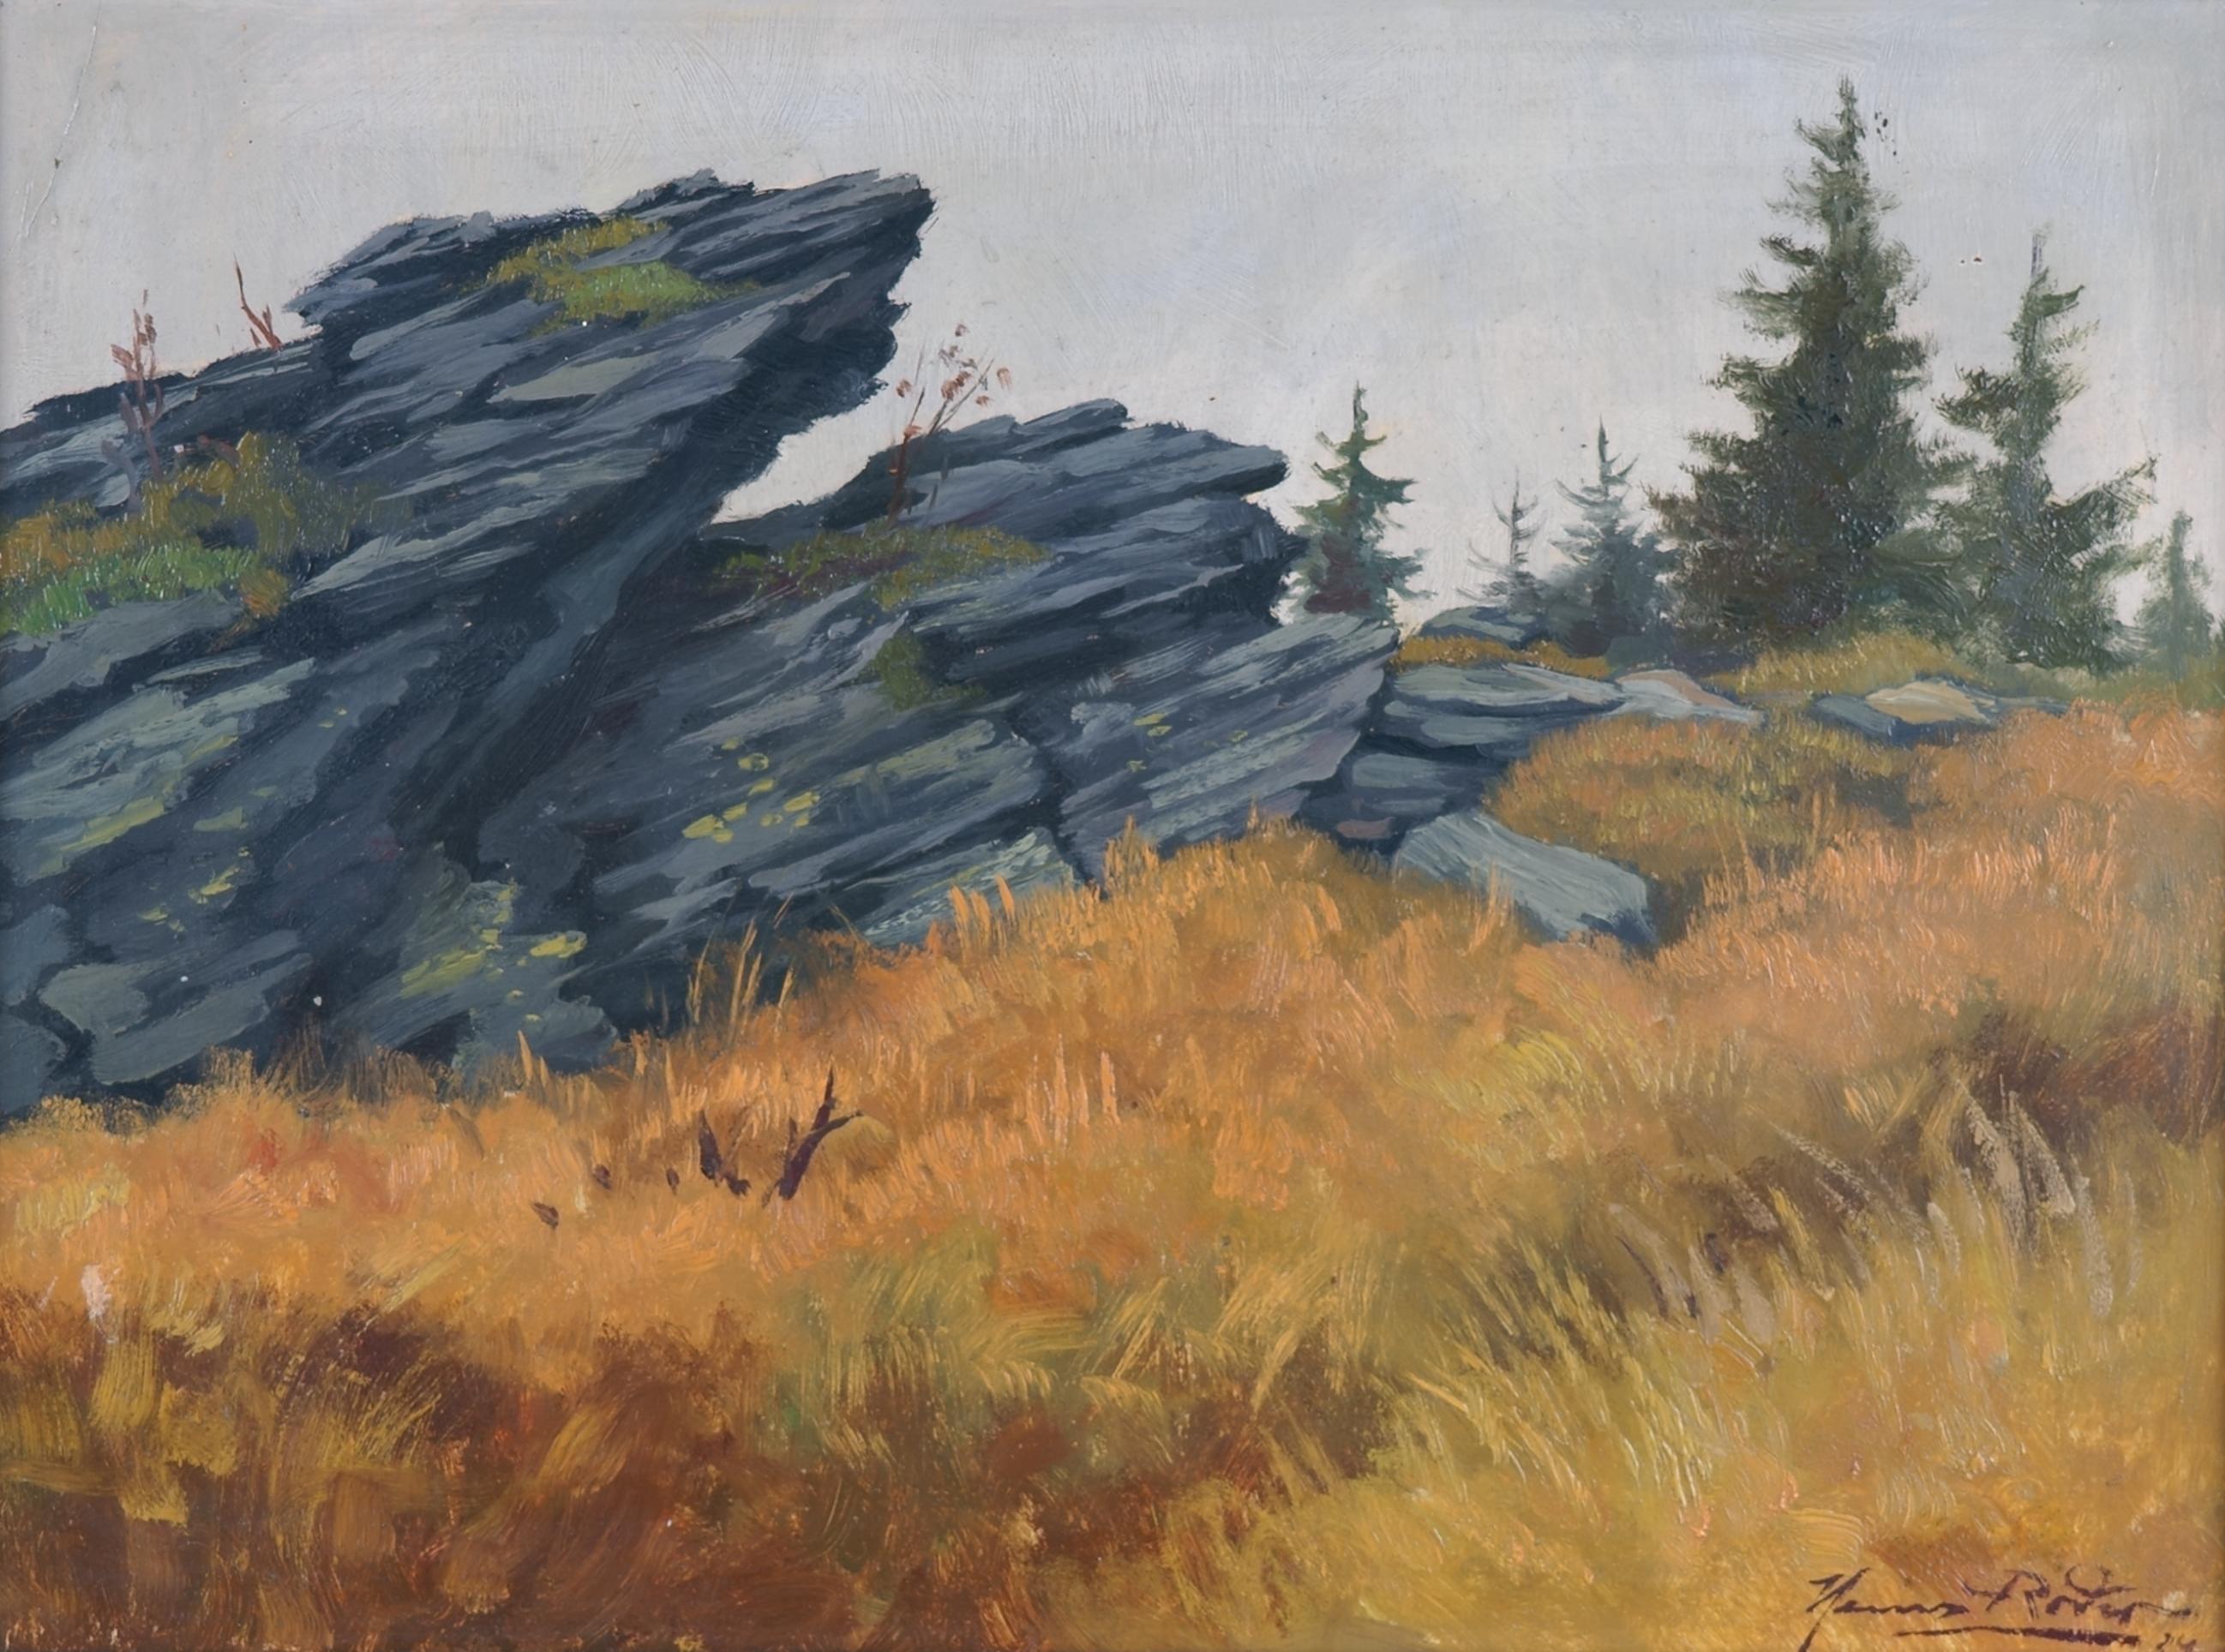 Heinz Roder Landscape Painting - Low Mountain Landscape with Rocks - The mystery of an inconspicuous place -